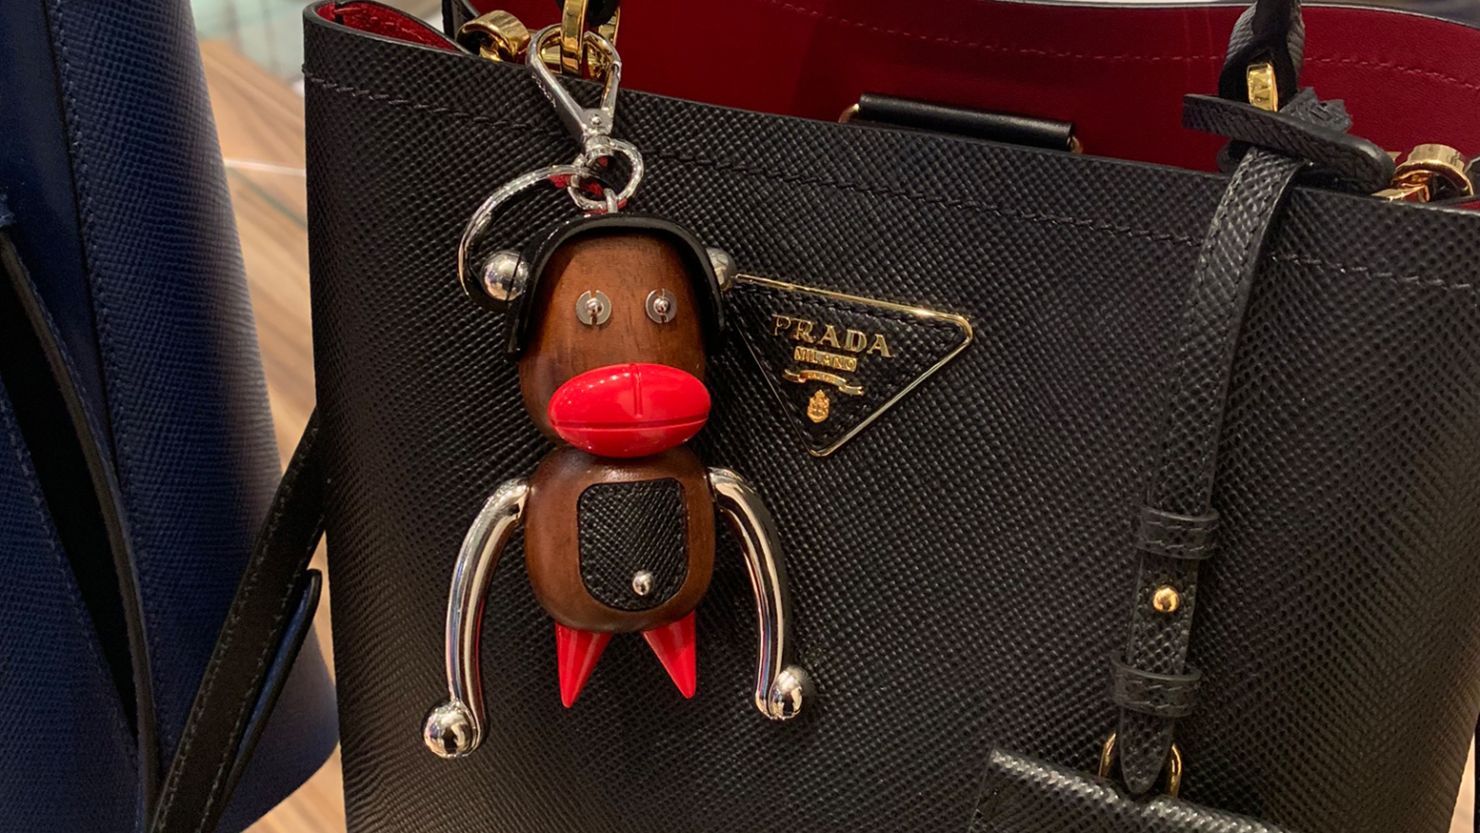 A New York-Based civil rights attorney had filed a complaint in 2018 with the New York City Human Rights Commission after spotting questionable dolls in a Prada store window in Soho. 